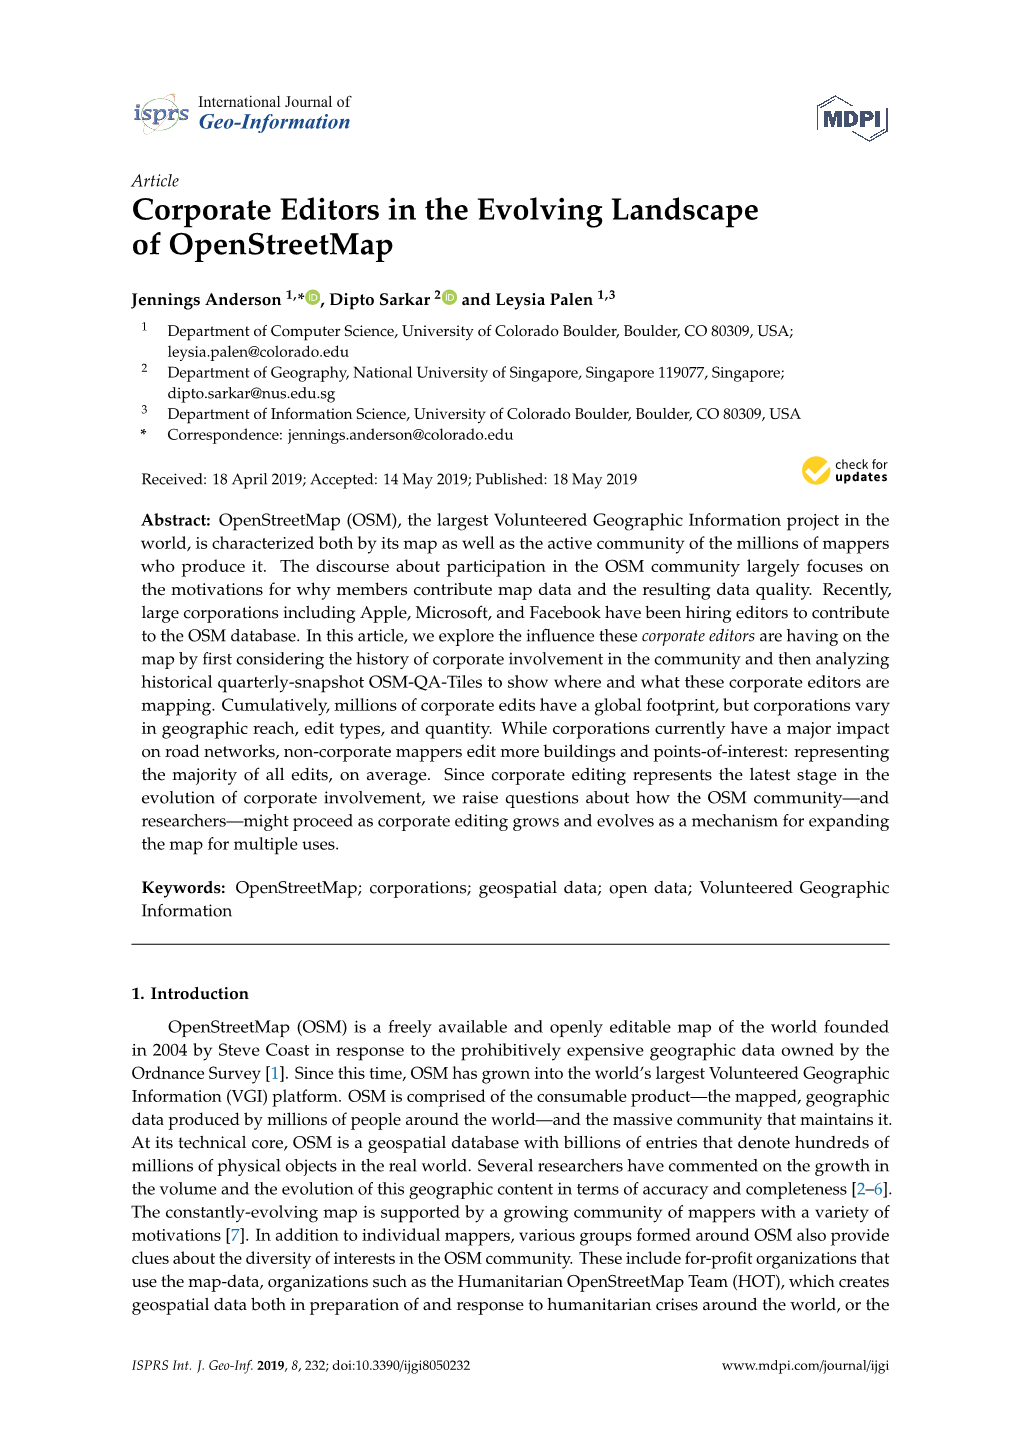 Corporate Editors in the Evolving Landscape of Openstreetmap